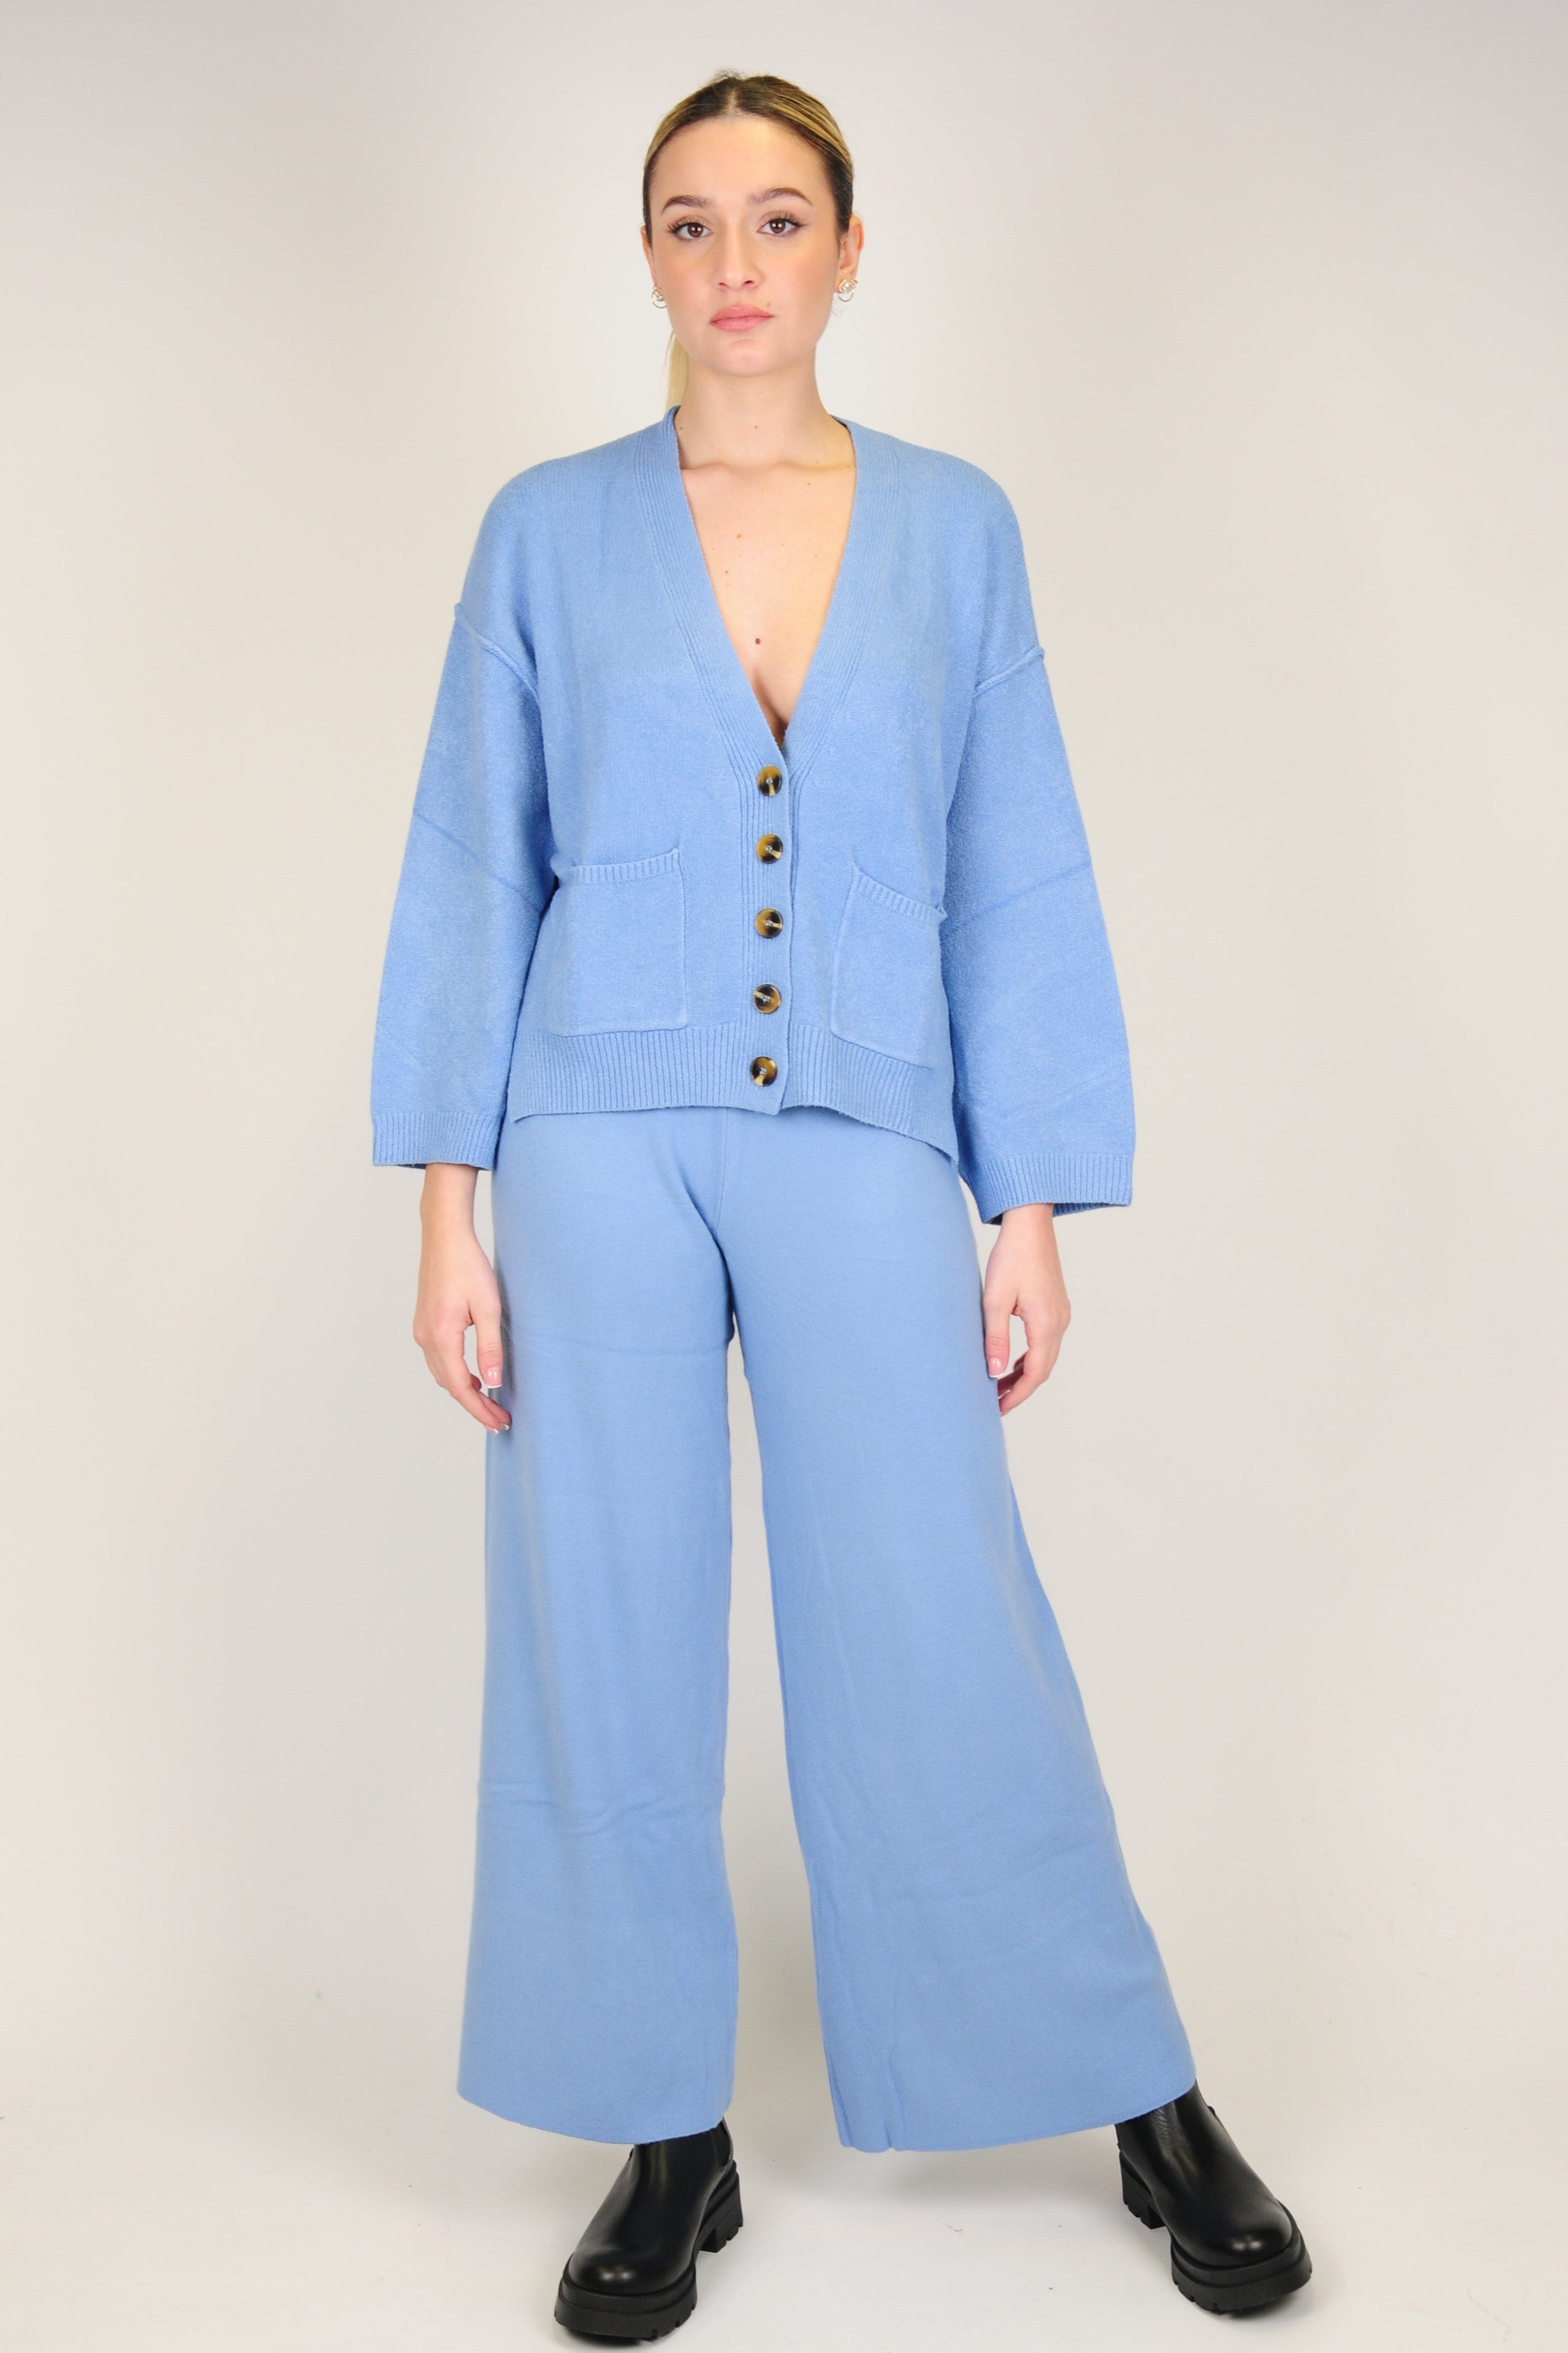 Tension in - Coordinated cardigan and trousers with elastic waist